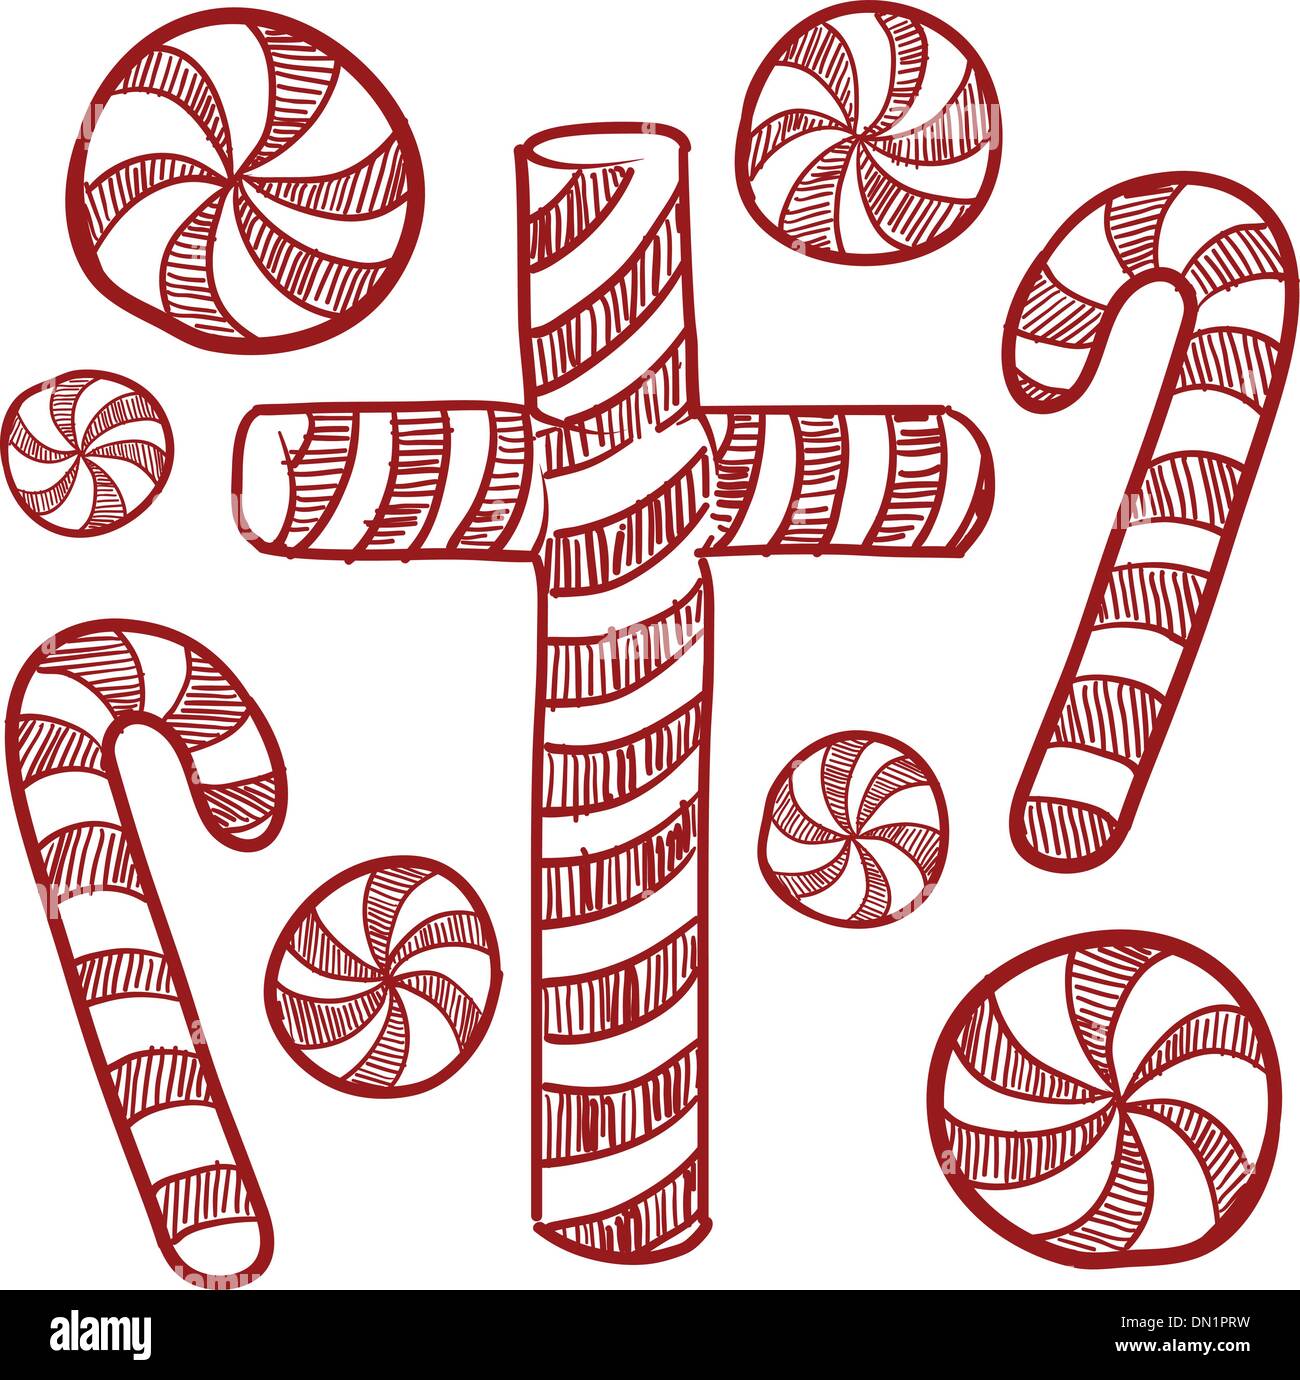 Candy canes and peppermints sketch Stock Vector